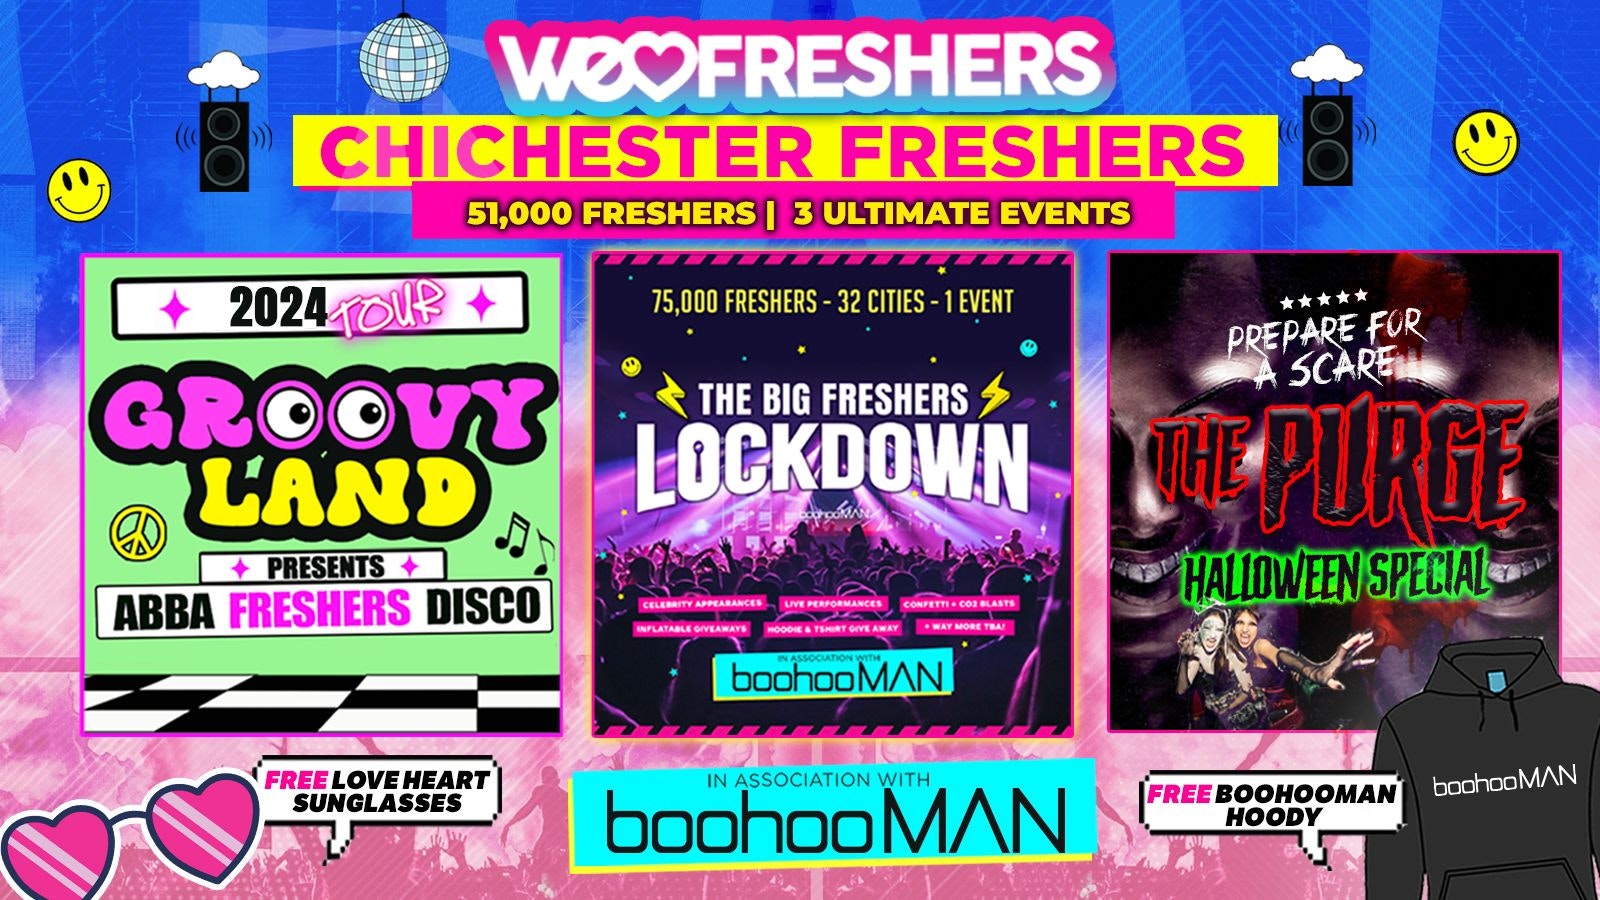 WE LOVE CHICHESTER FRESHERS 2024 in association with boohooMAN ❗3 EVENTS ❗